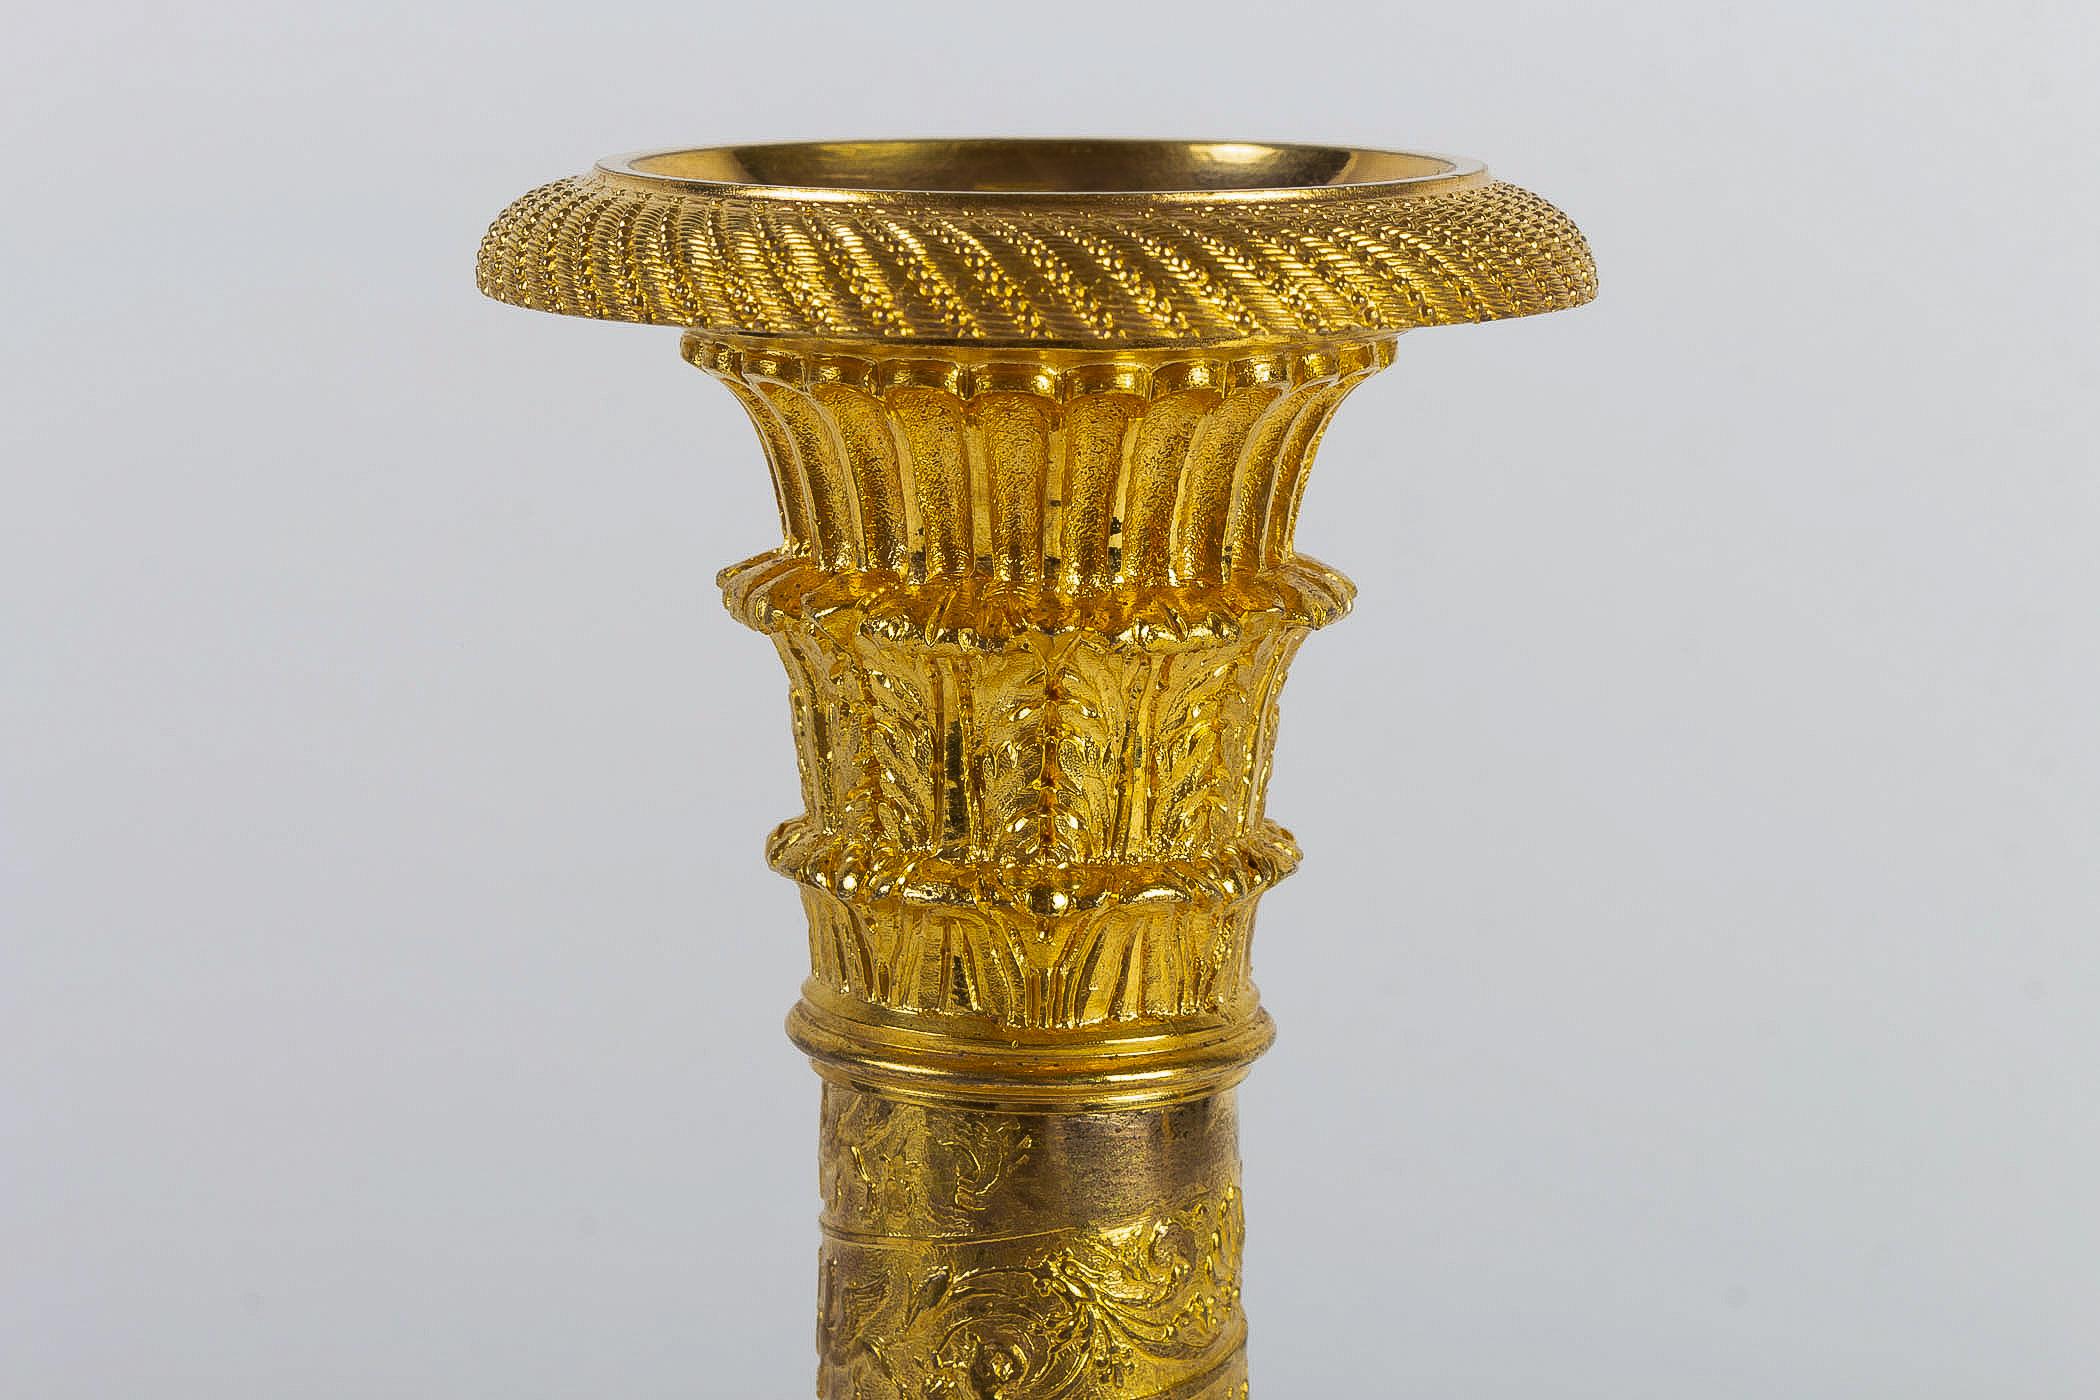 19th Century French Empire Period Pair of Gilt-Bronze with Twisted-Barrels Candlesticks, 1810